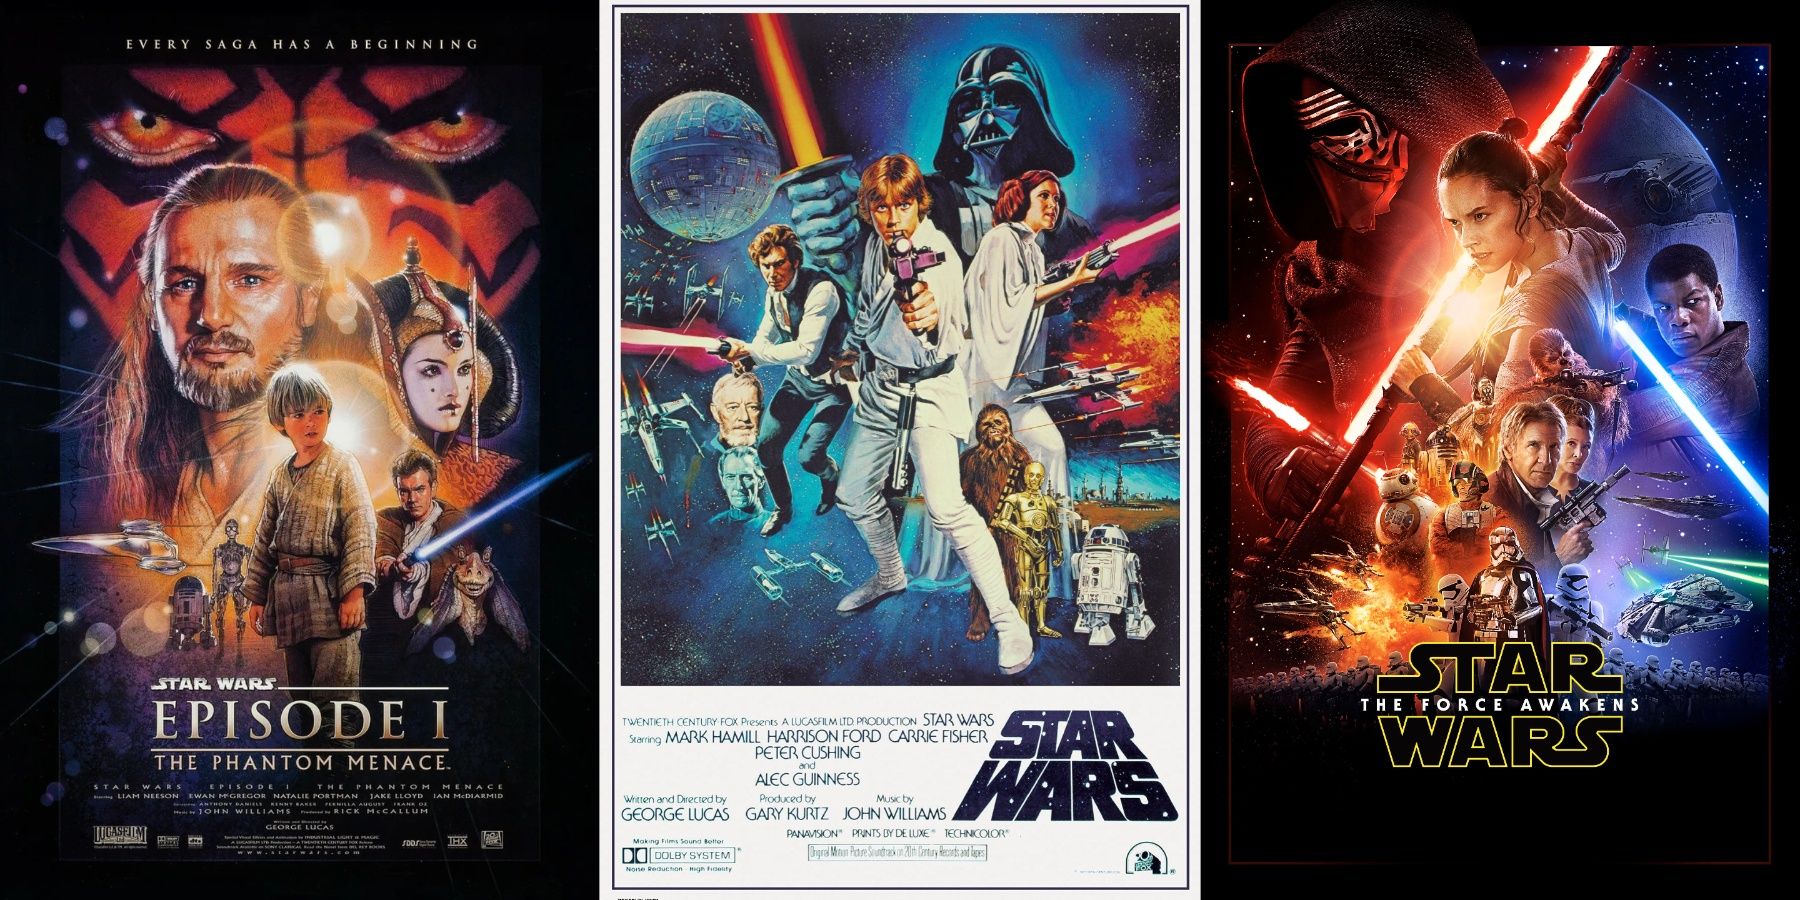 Star Wars Movie Posters - Star Wars Episode 1: The Phantom Menace, Episode 4: A New Hope, Episode 7: The Force Awakens